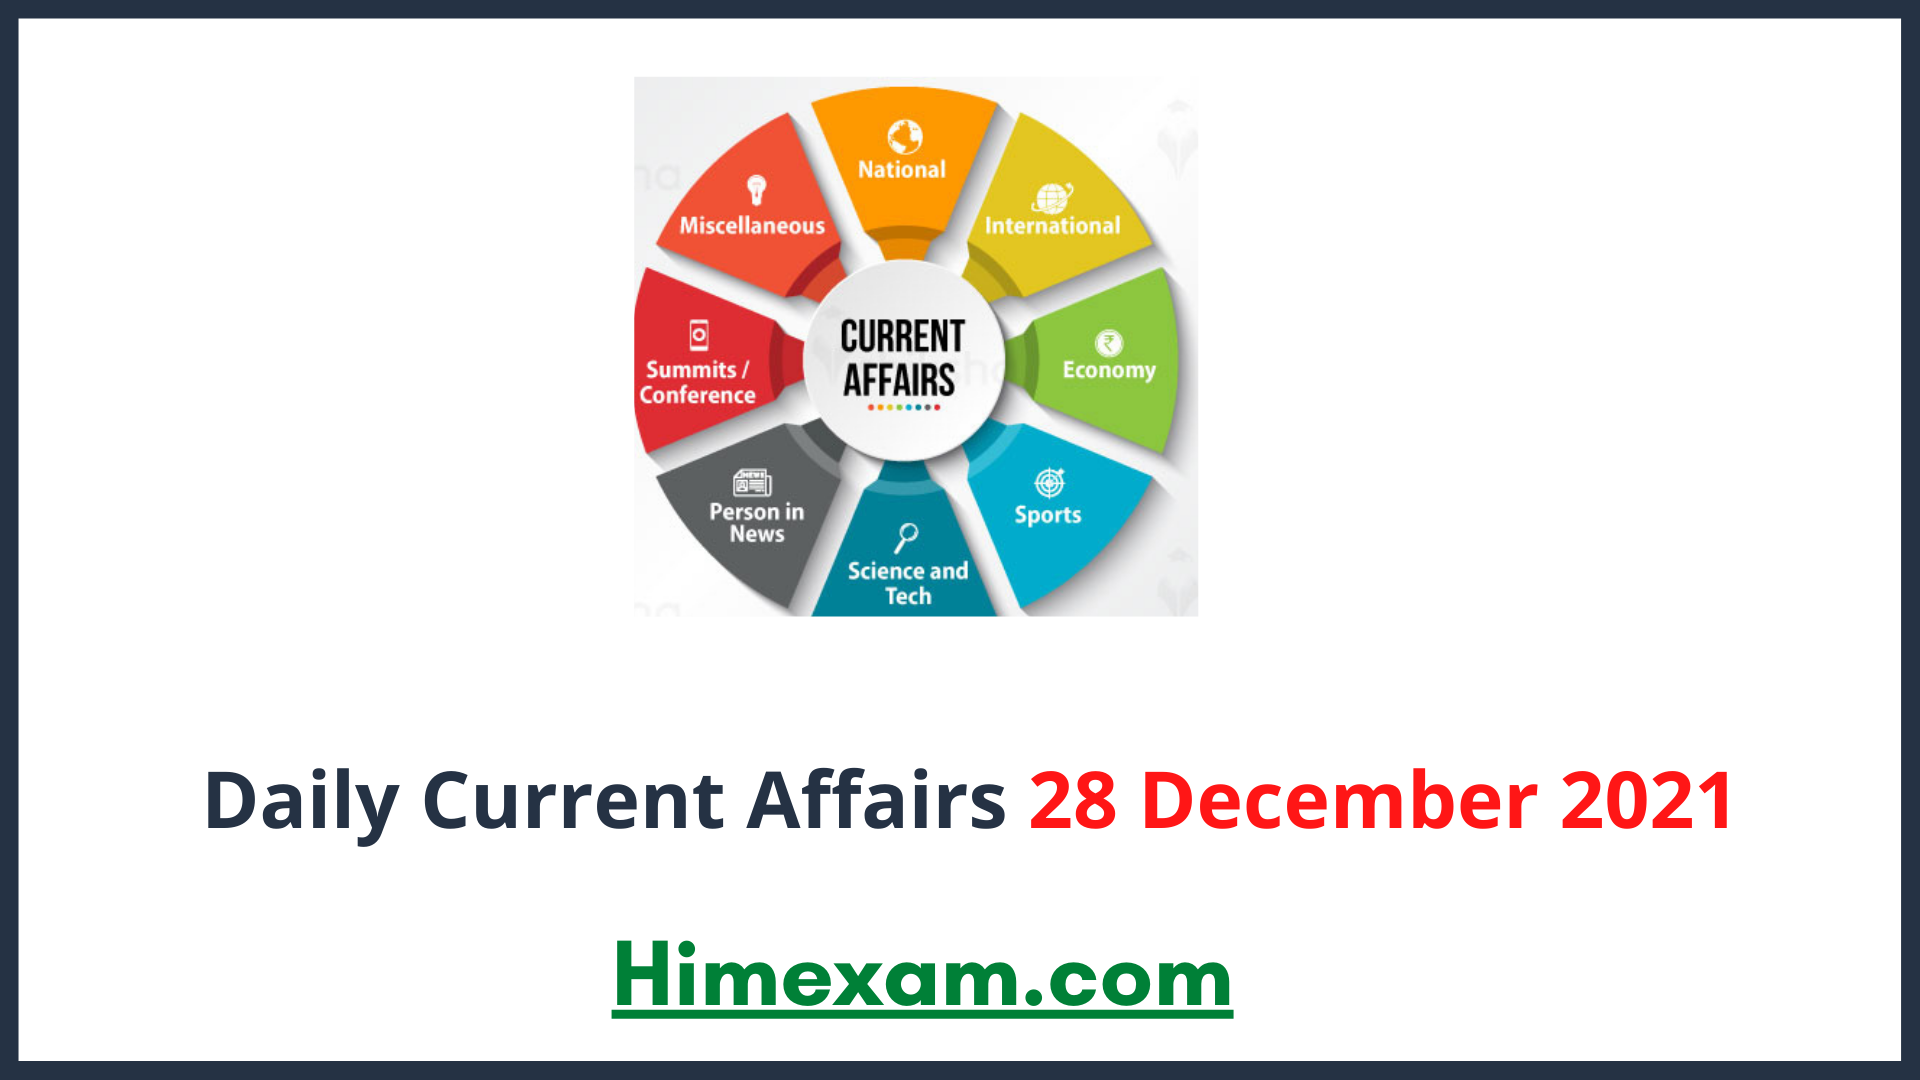 Daily Current Affairs 28 December 2021